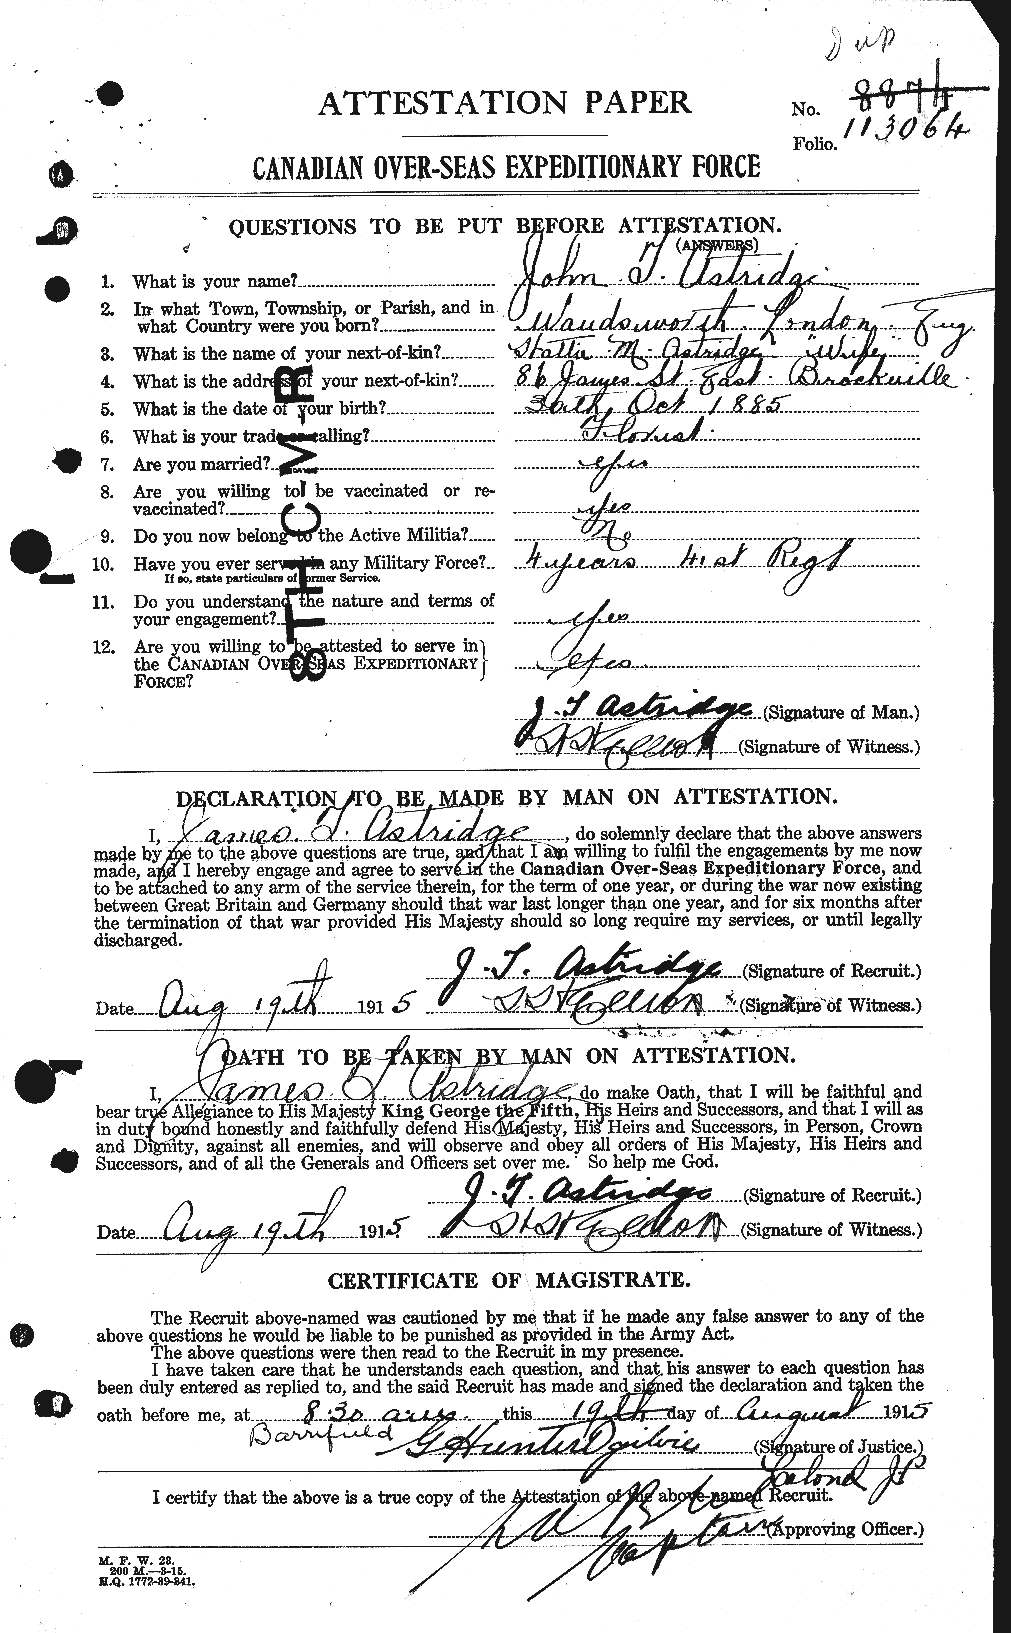 Personnel Records of the First World War - CEF 217074a